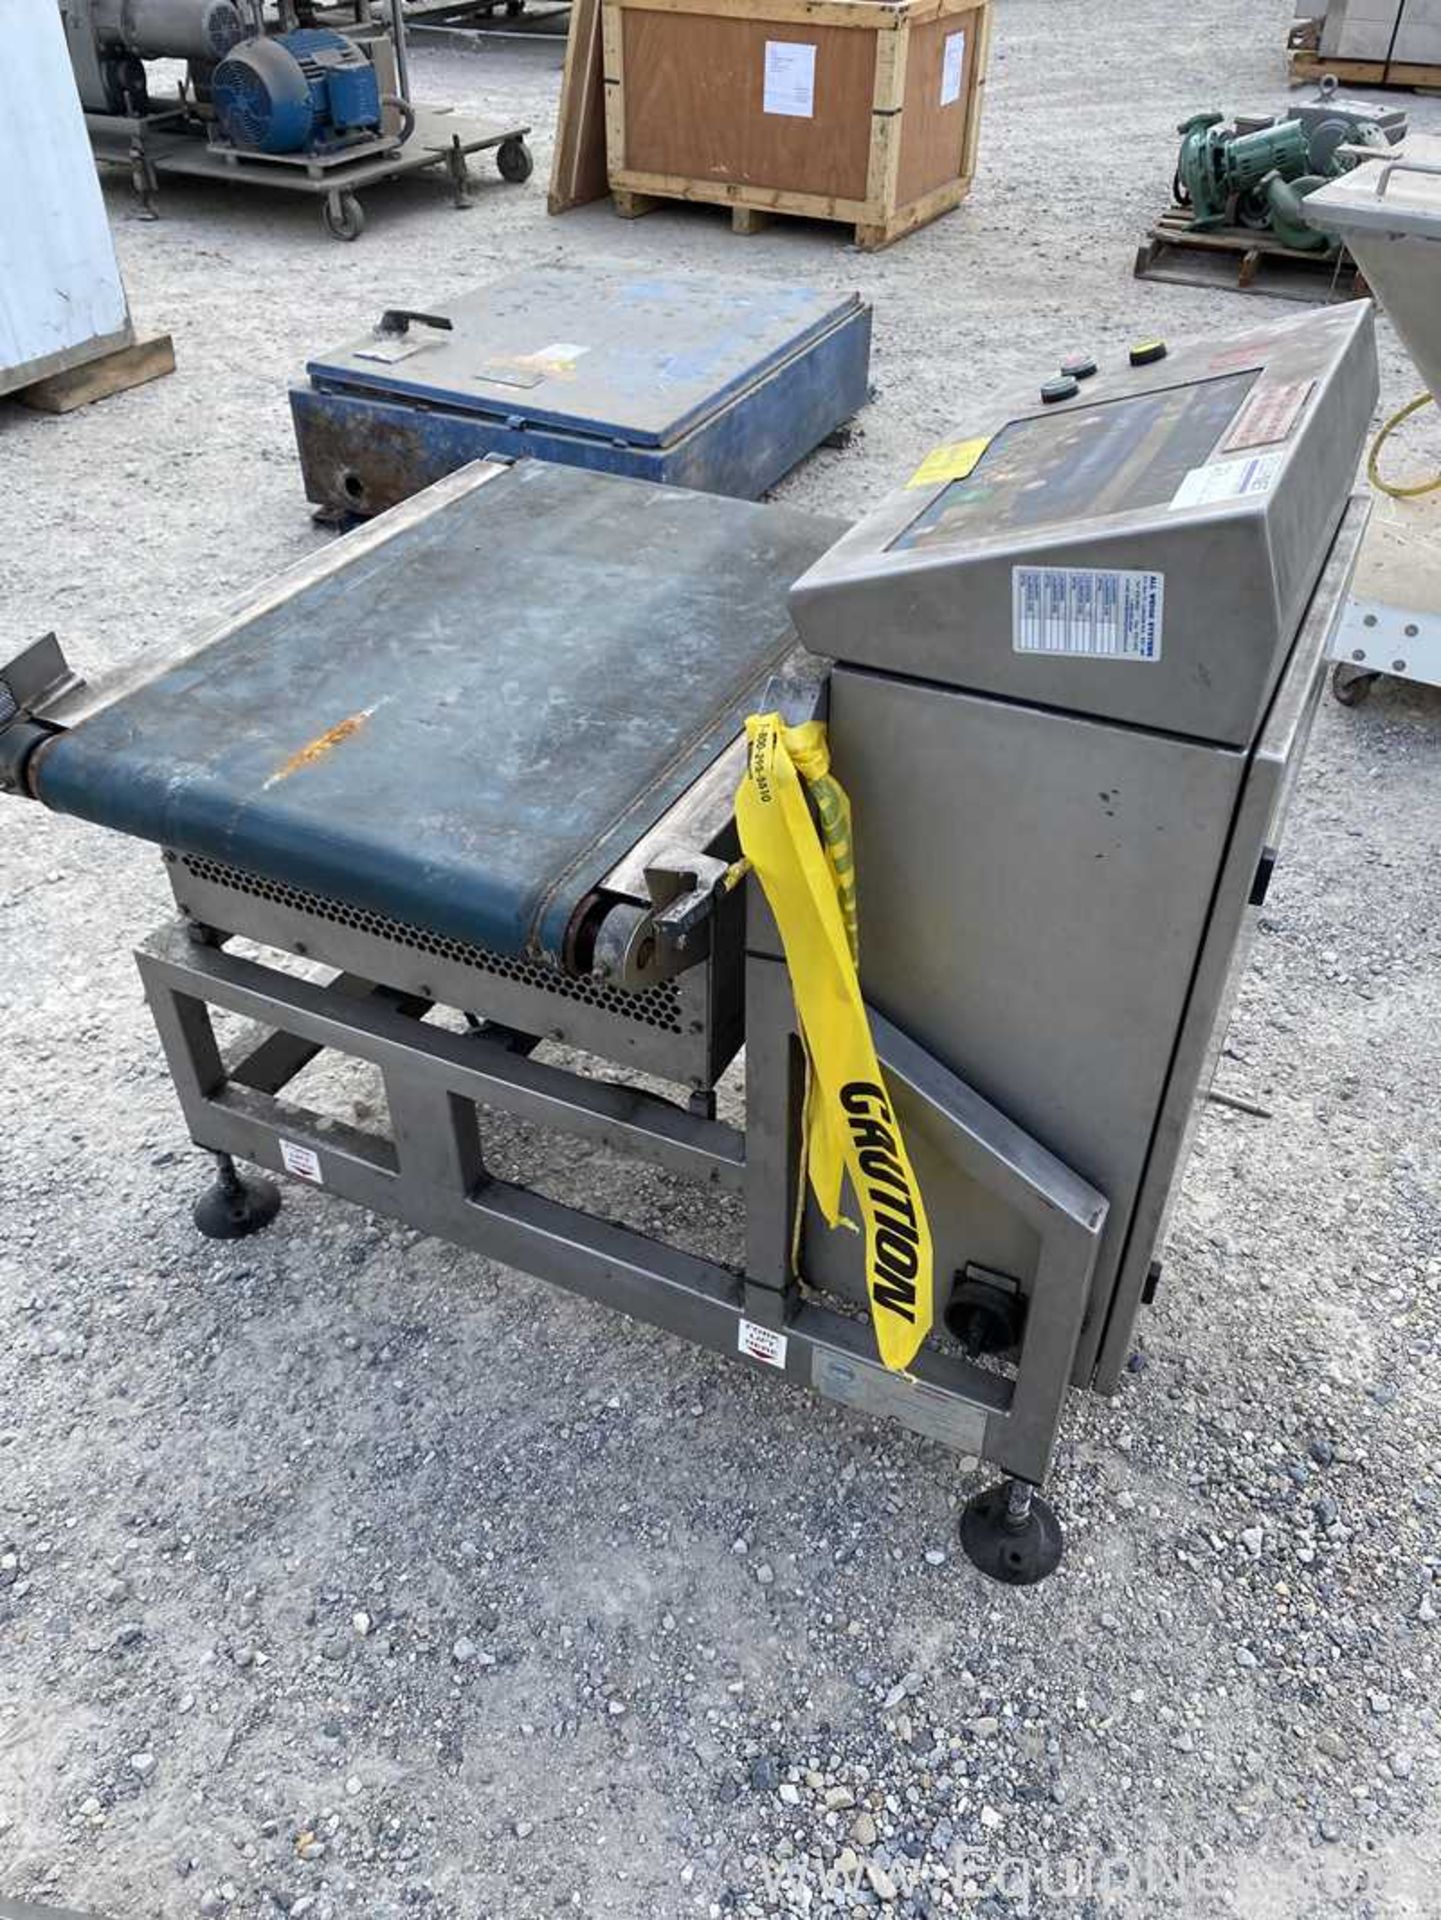 EQUIPNET LISTING #842831; REMOVAL COST: $60; DESCRIPTION: Loma CCW59907-01484 Check Weigher - Image 4 of 6